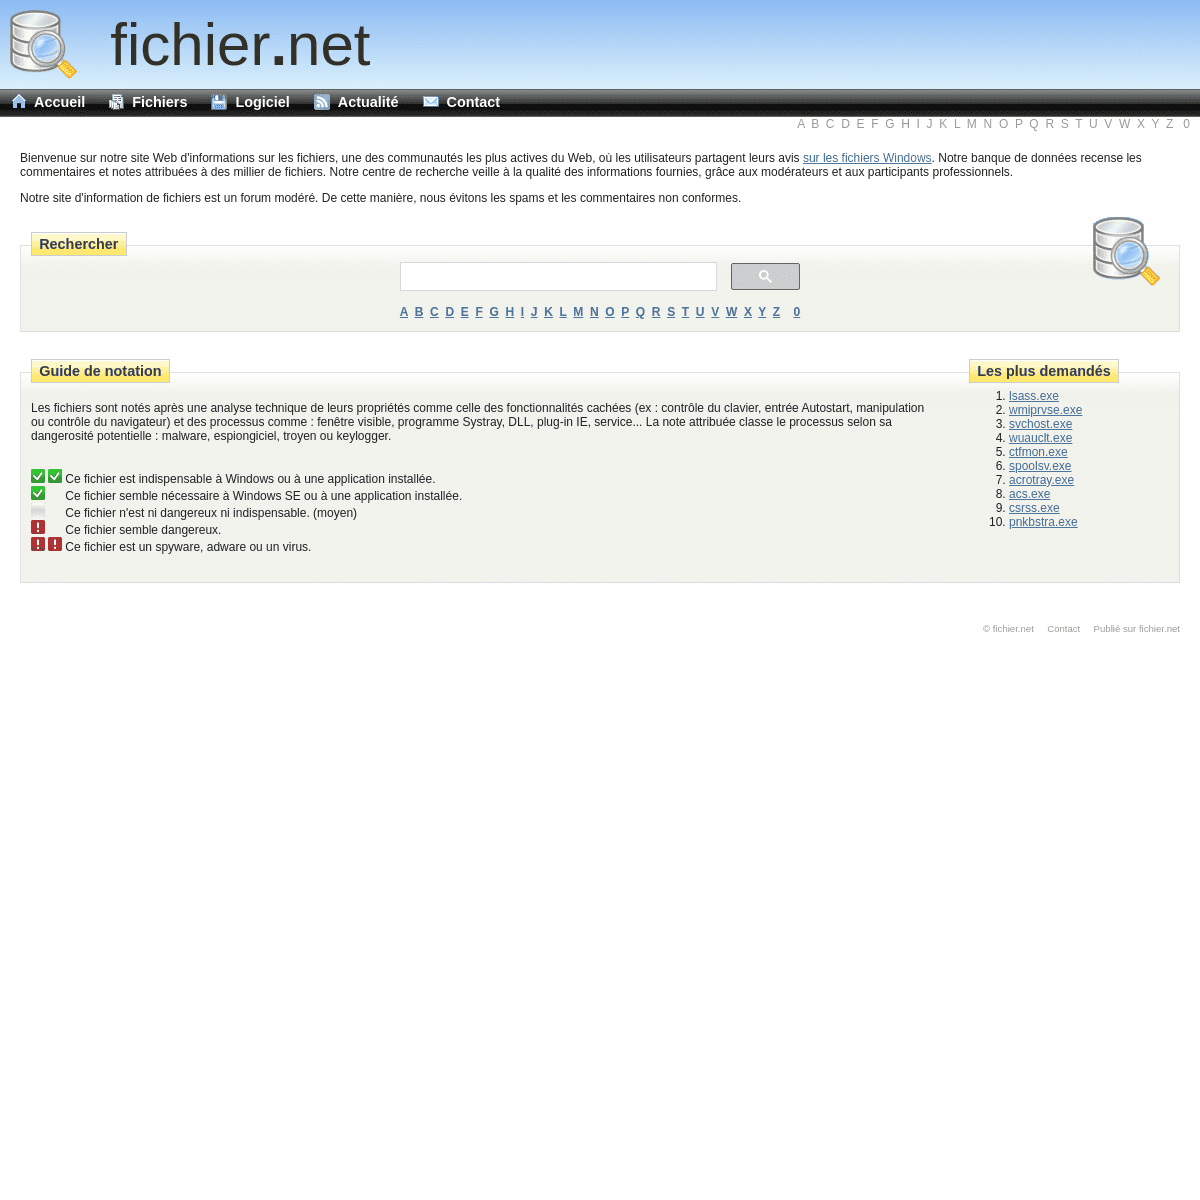 A complete backup of fichier.net